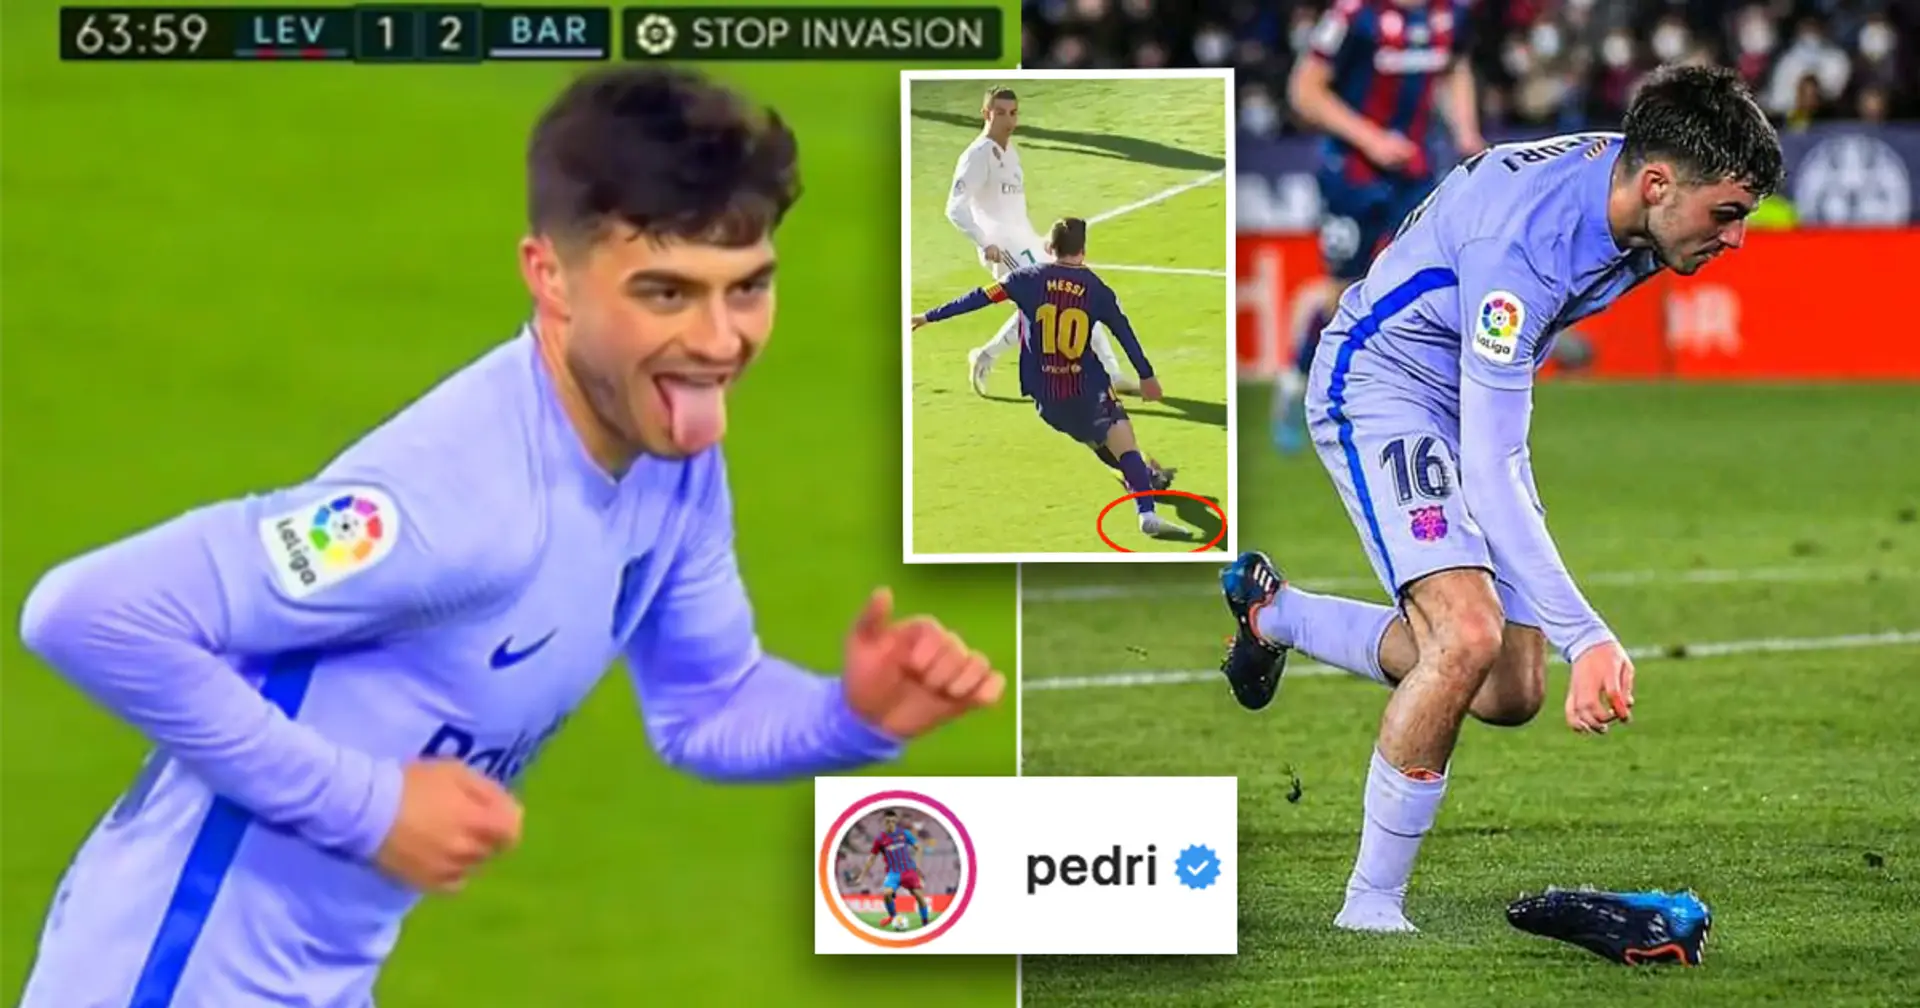 Pedri loses boot during Levante game, re-posts pic with shoeless Messi 24 hours later